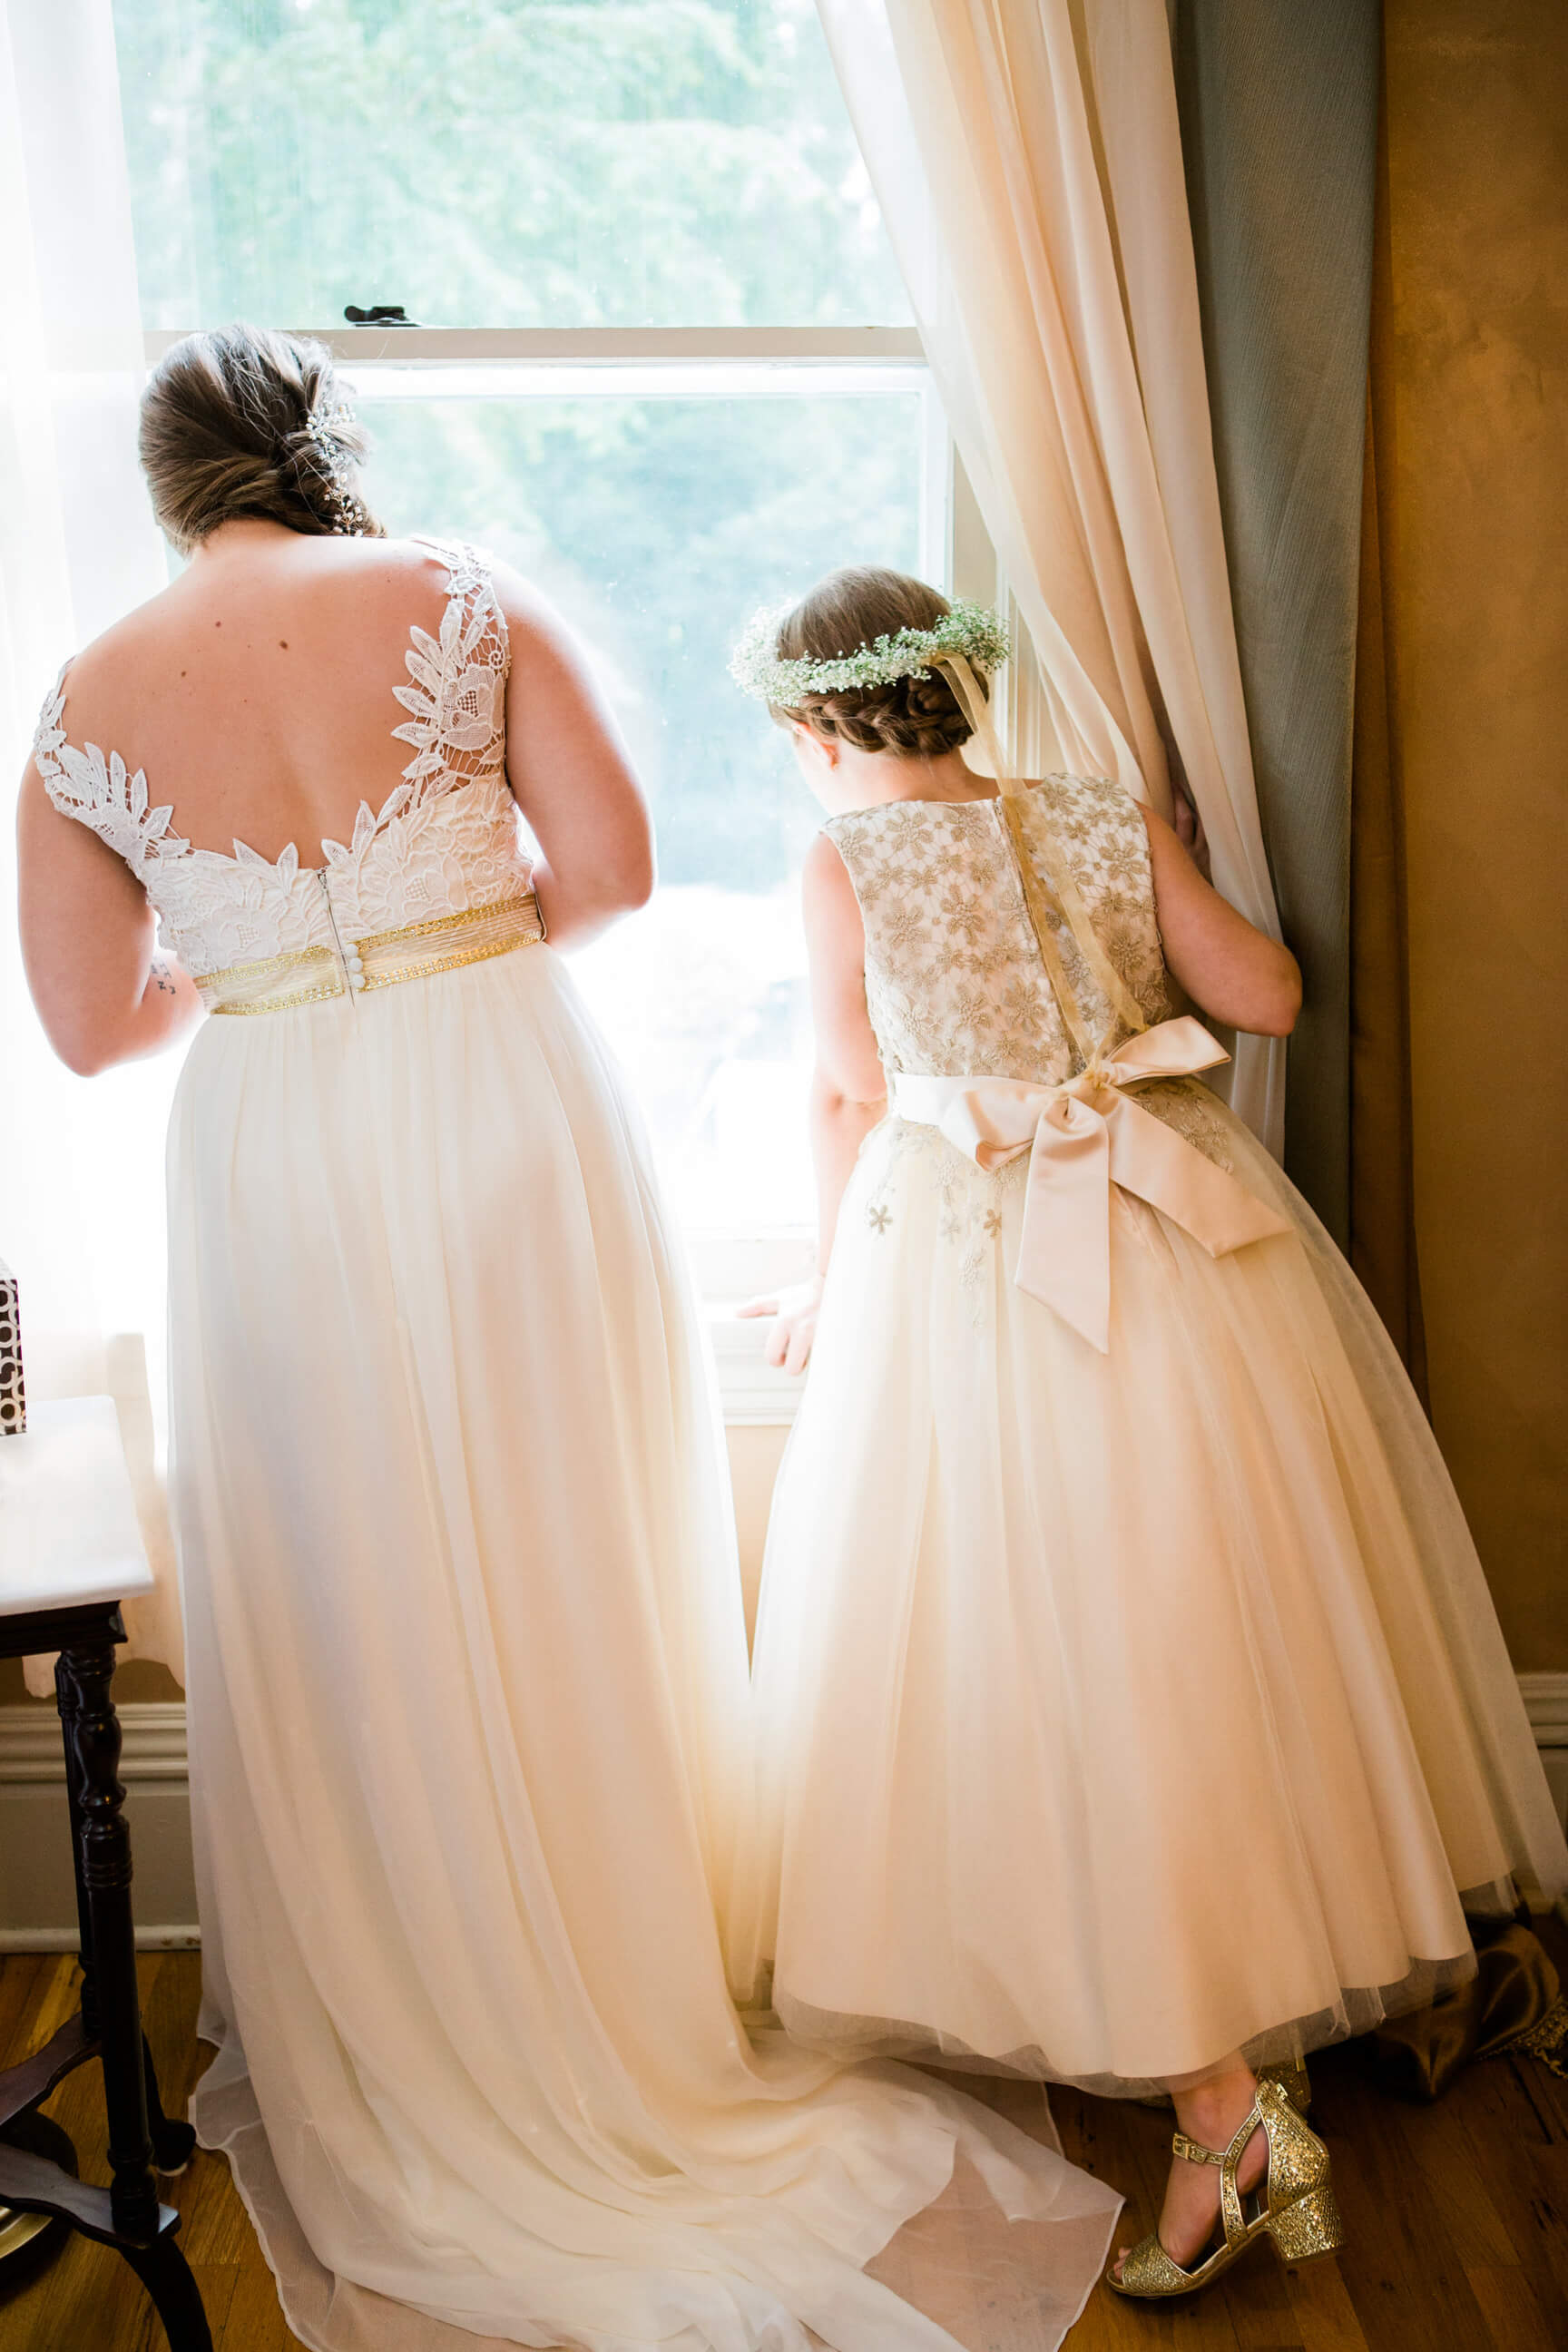 A bride and a flower girl look out the window as they wait for her wedding to start in Missoula Montana